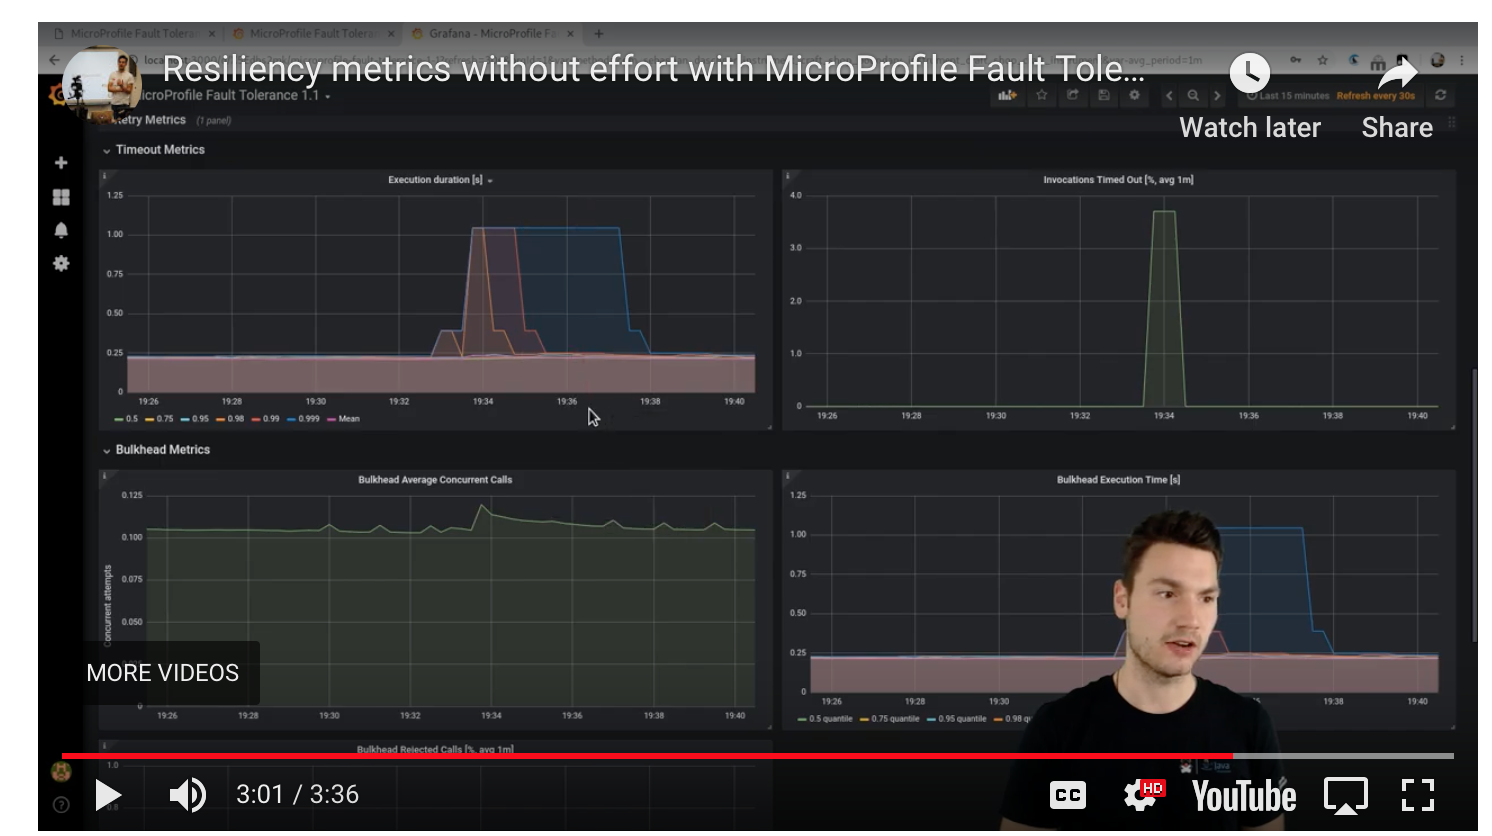 Video Monitoring Resiliency Behavior With Fault Tolerance 1.1.